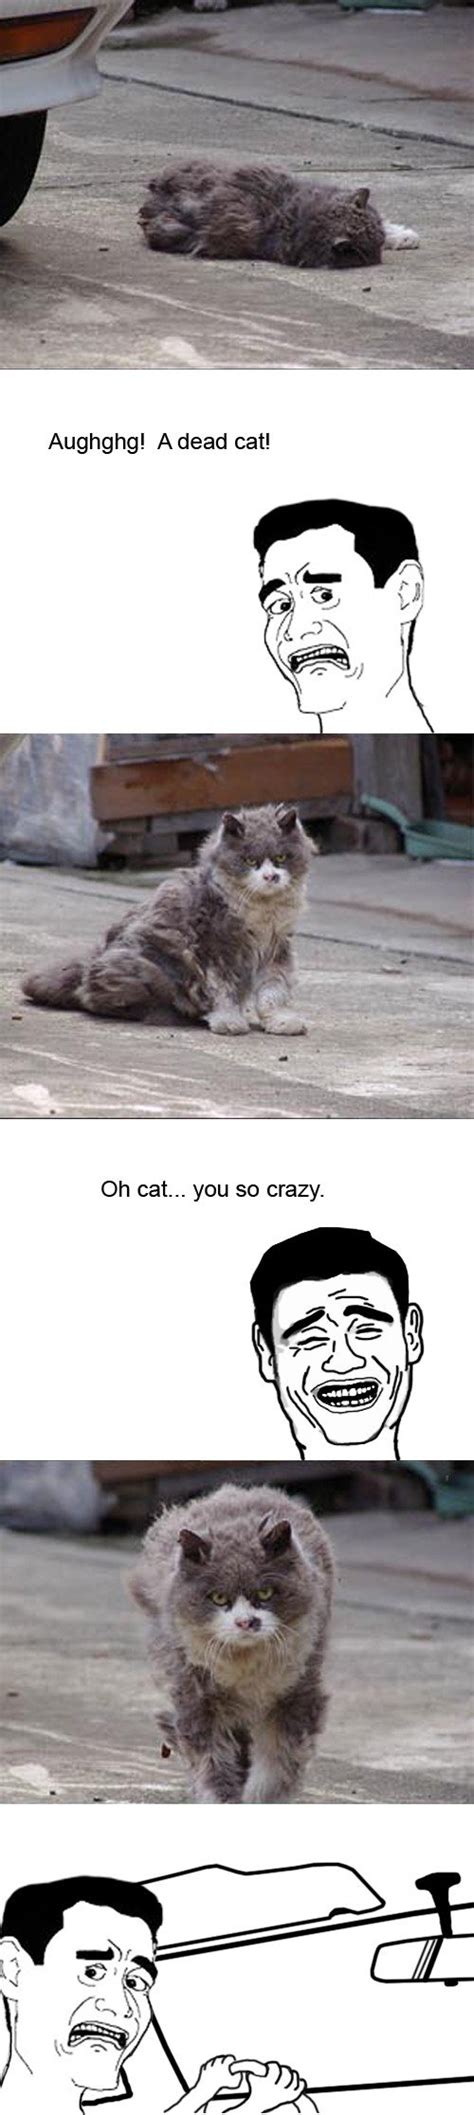 Rage Faces Cat Funny Pictures And Best Jokes Comics Images Video